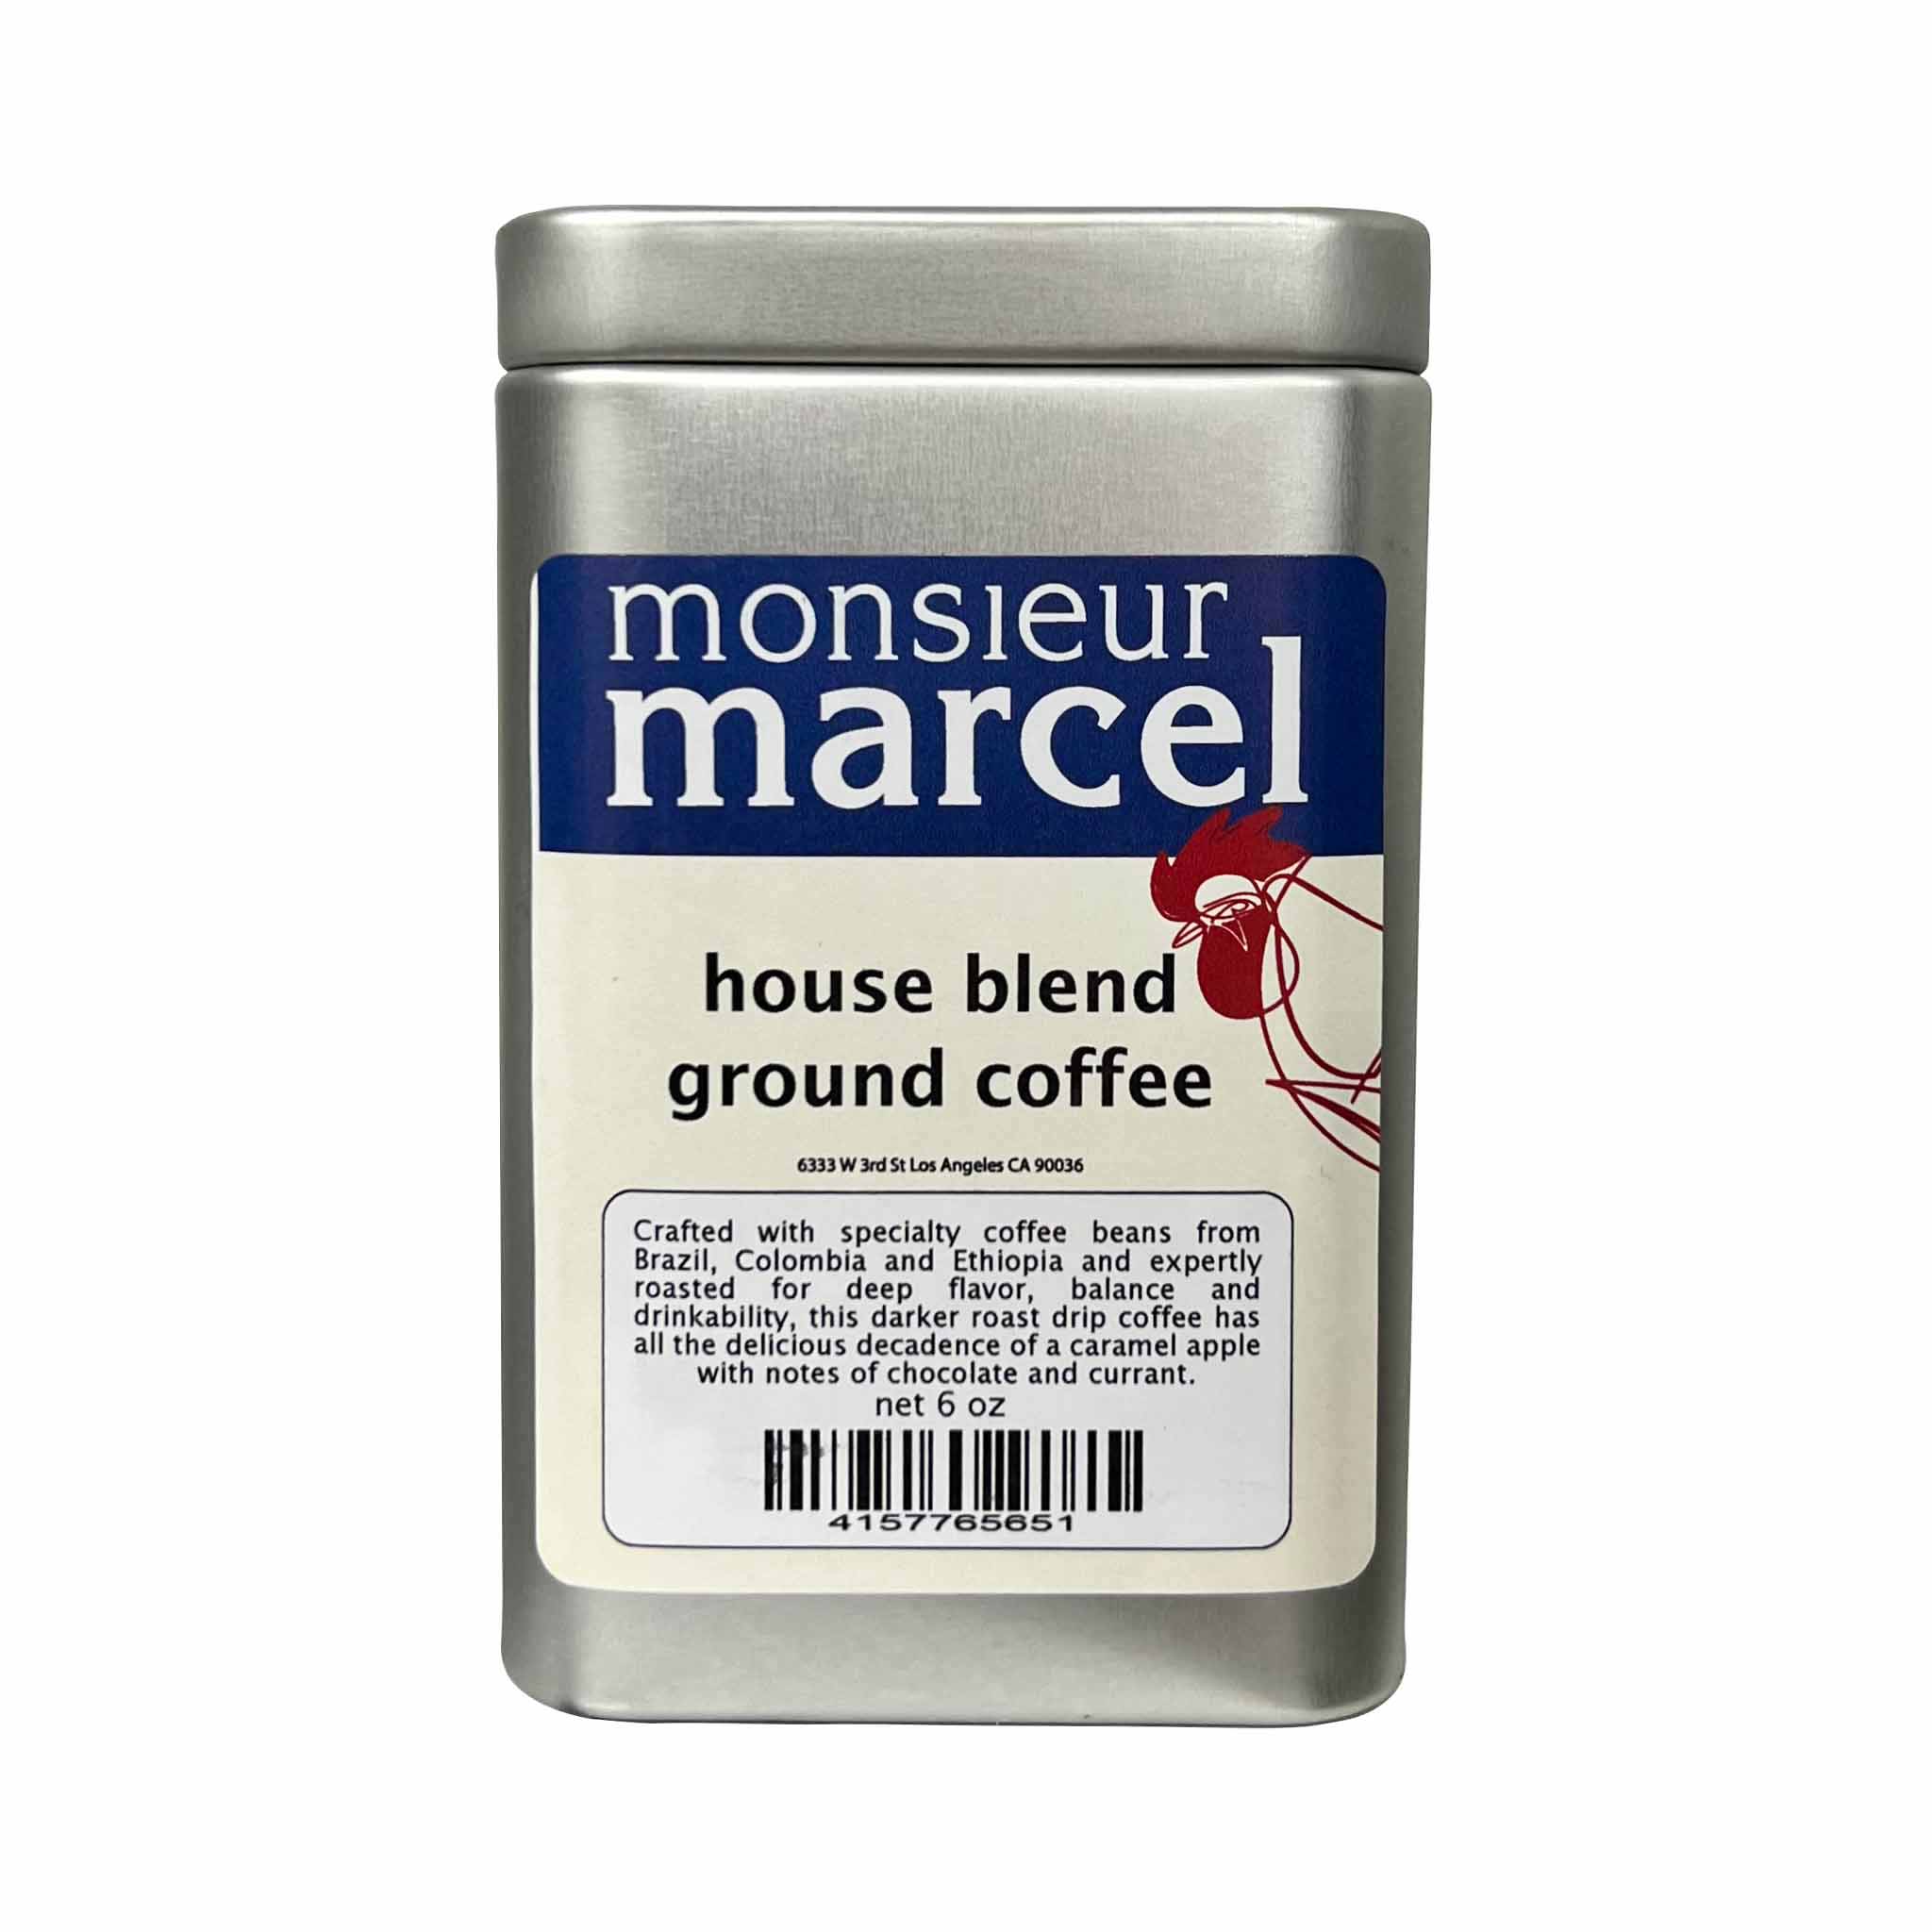 Monsieur Marcel House Blend Ground Coffee in a Tin